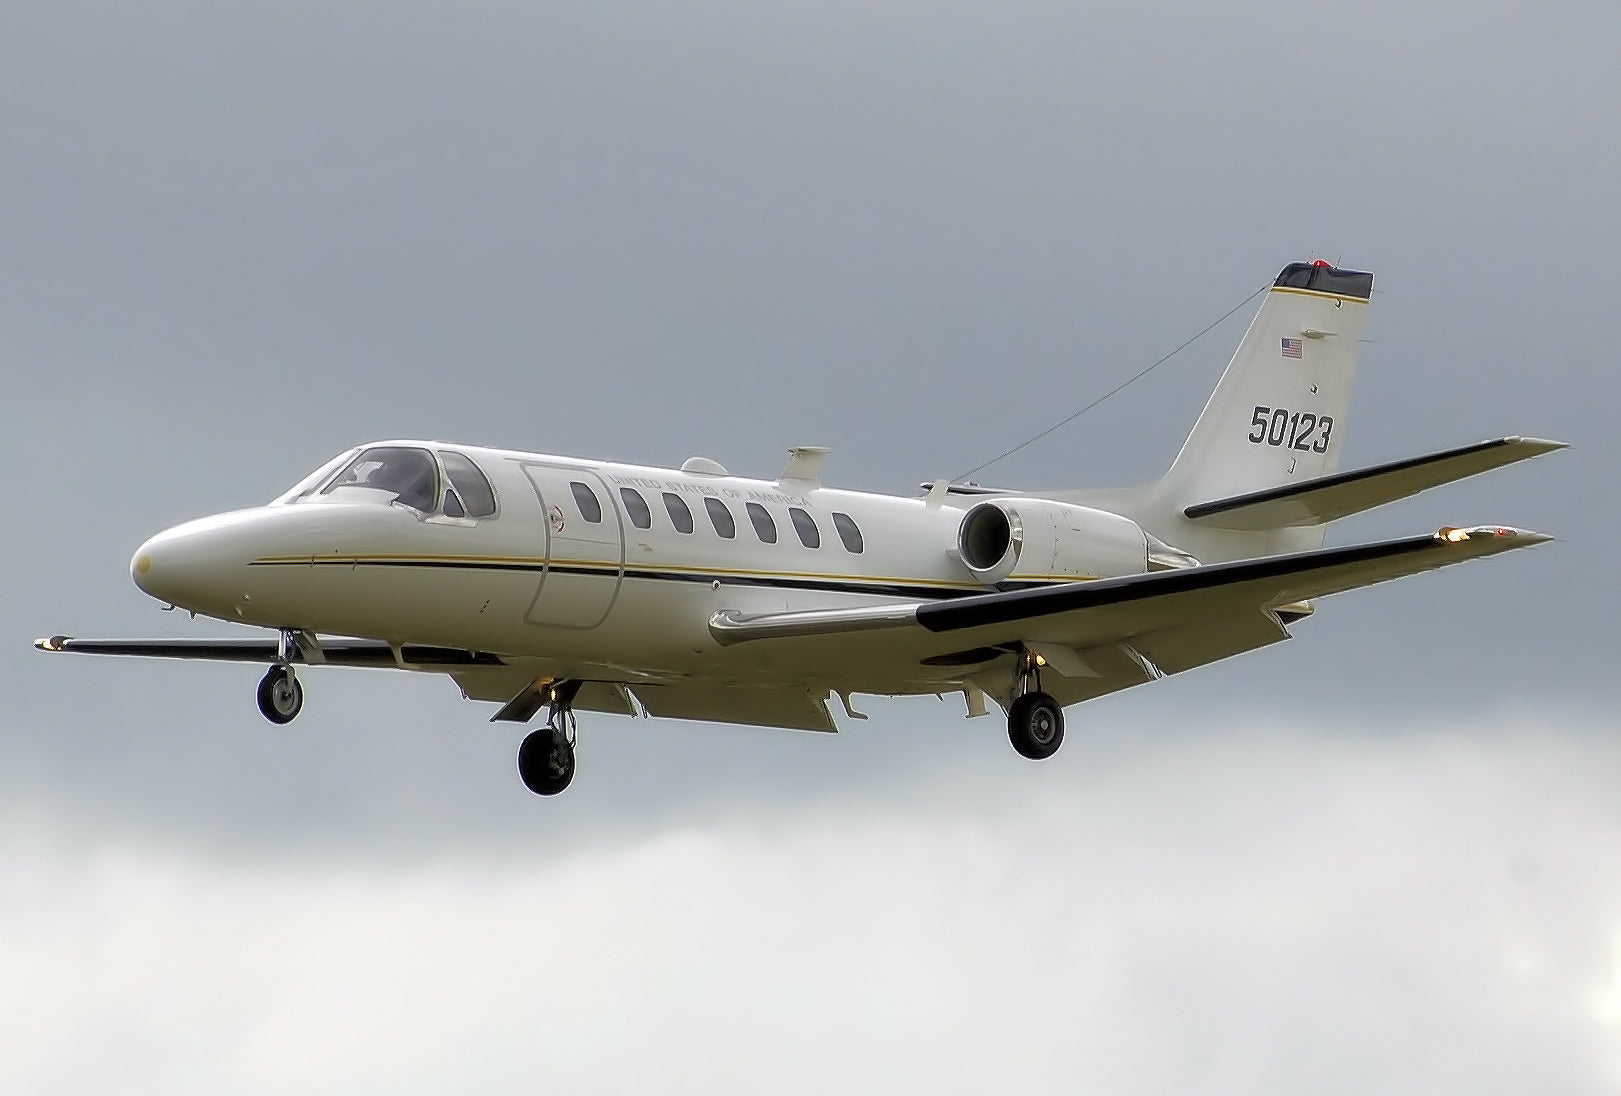 Illustrative photo of a Cessna 560 Citation V similar to the one involved in the accident